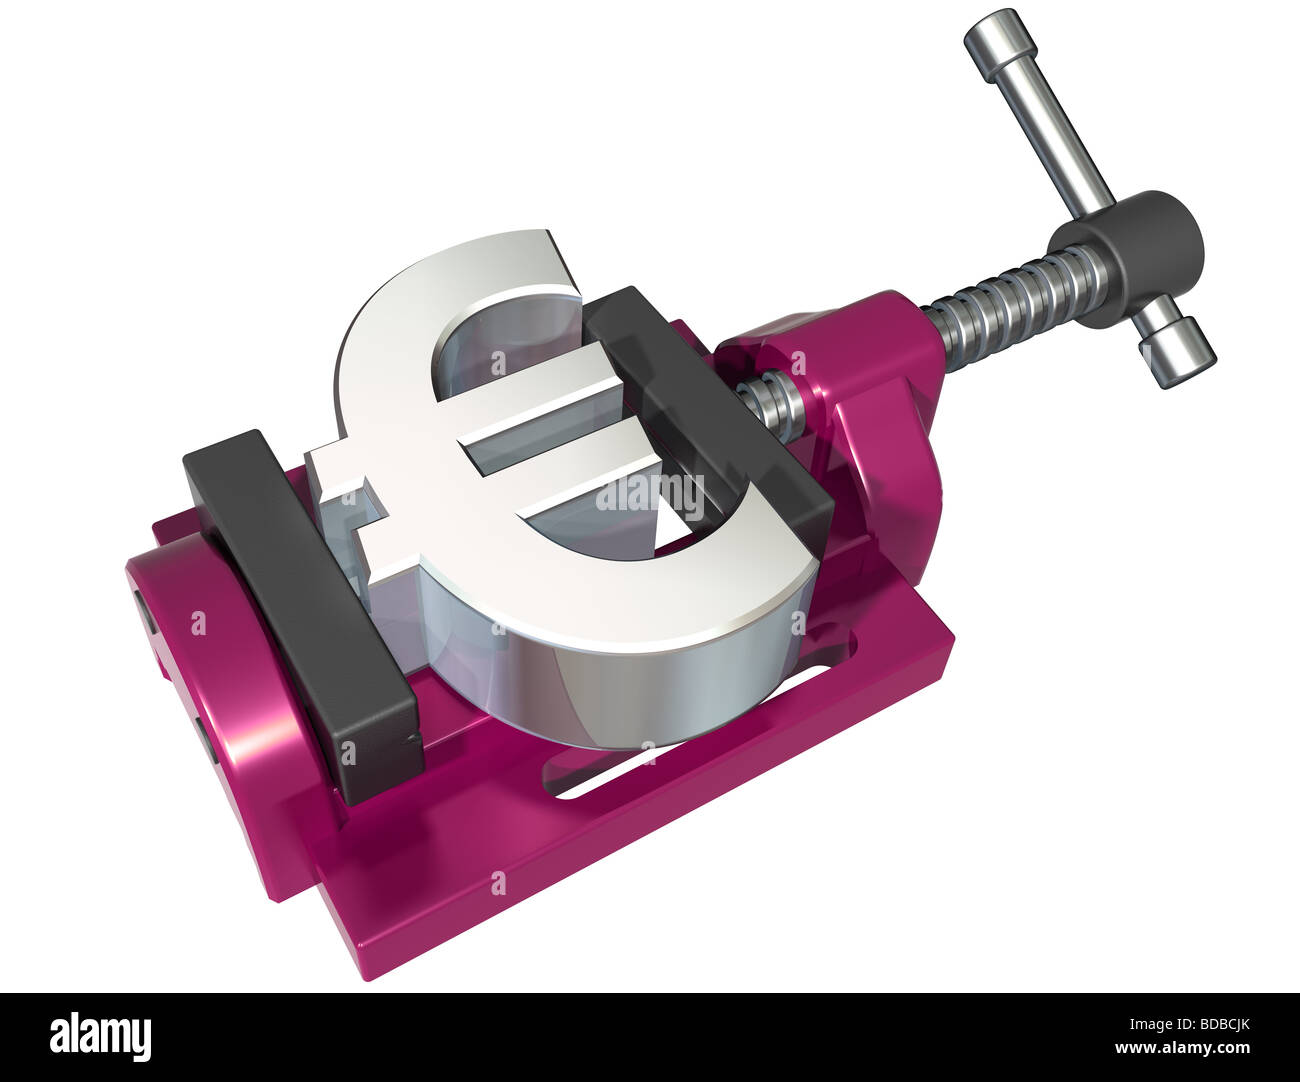 Isolated illustration of a euro symbol being squeezed in a vice Stock Photo